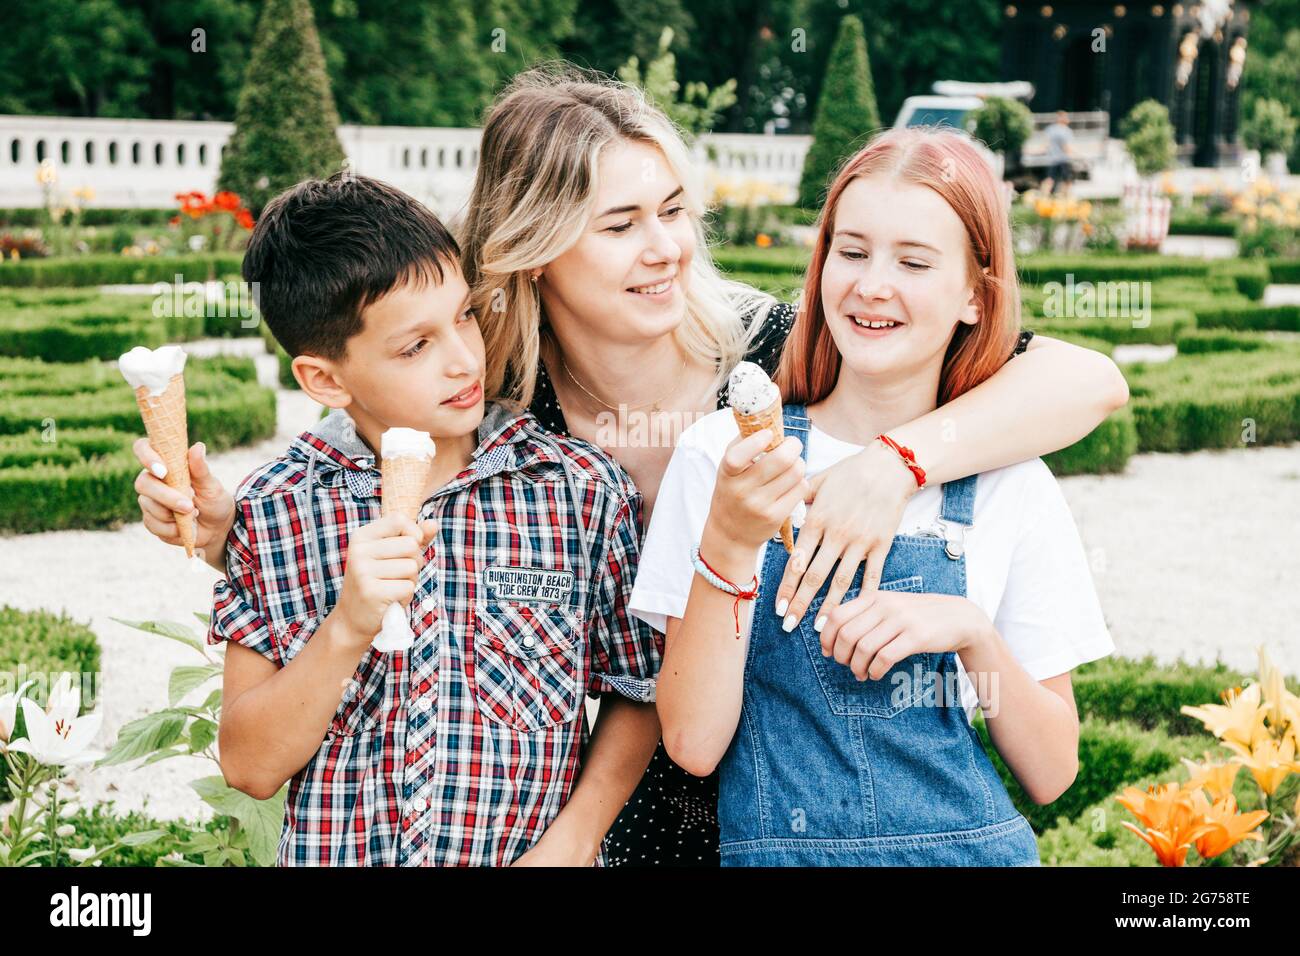 young woman teacher treats her students to teenagers ice cream, friendship concept Stock Photo